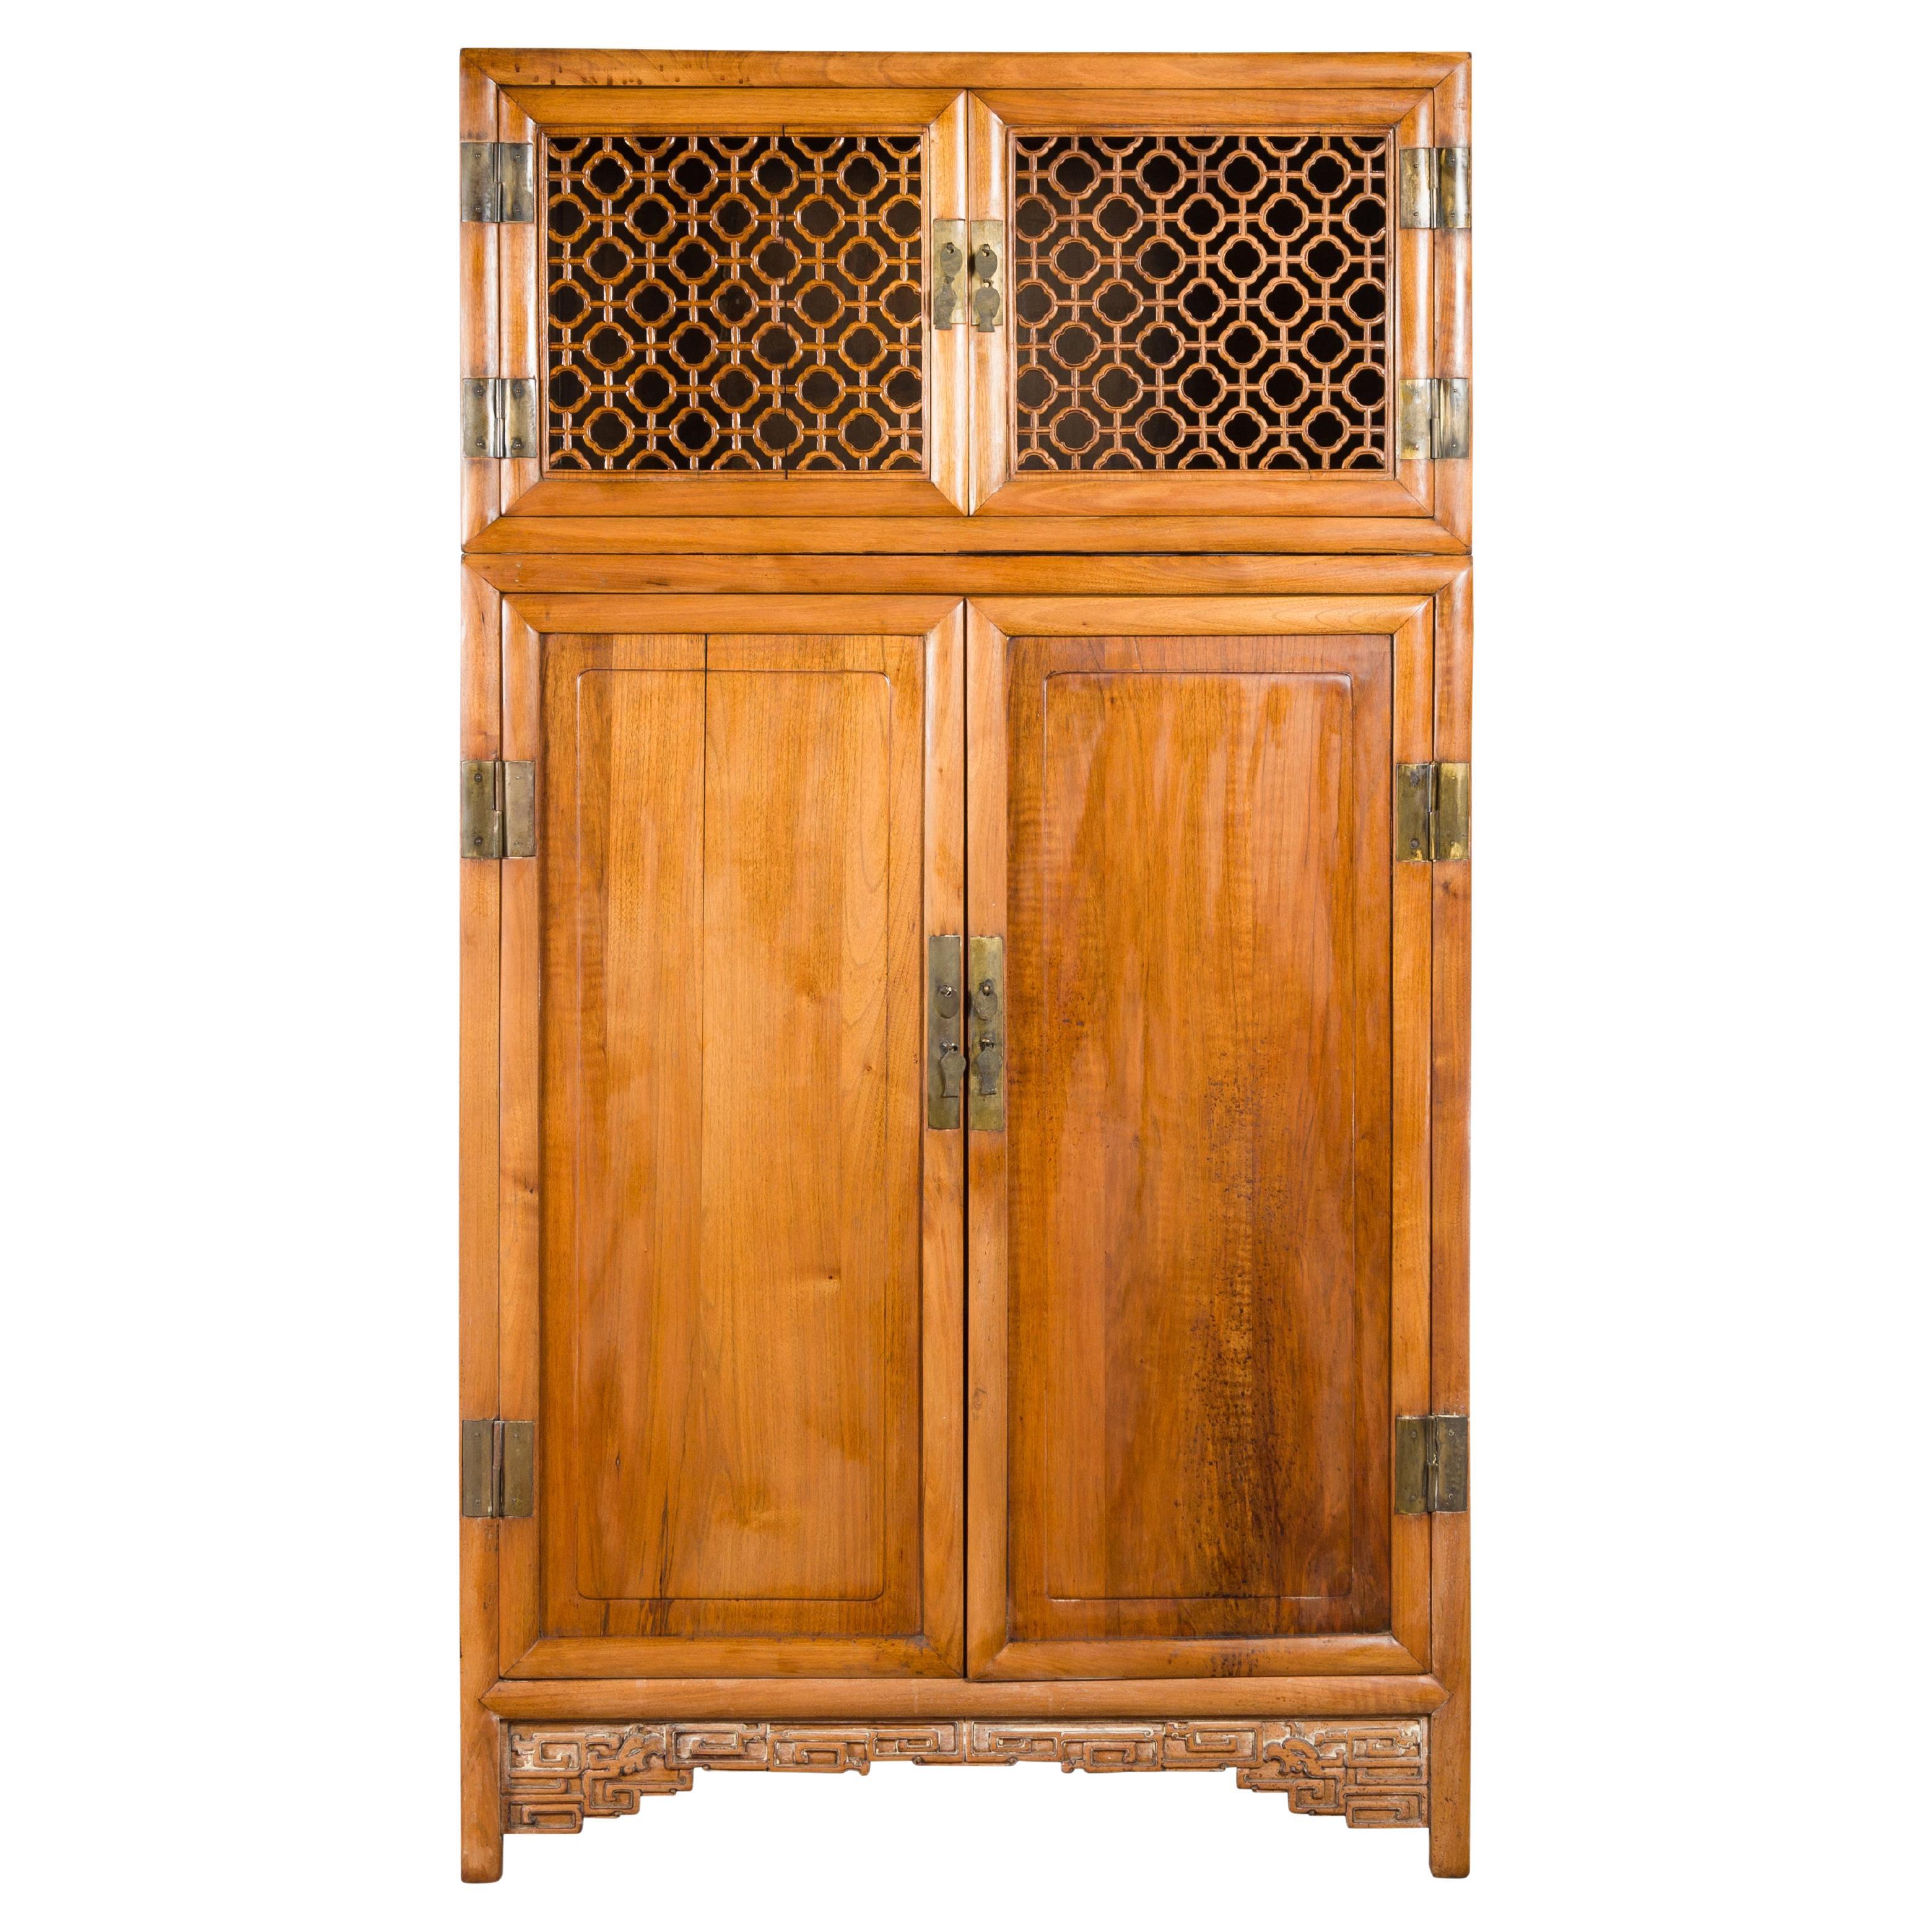 Chinese Qing Dynasty 19th Century Kitchen Cabinet with Quatrefoil Style Fretwork